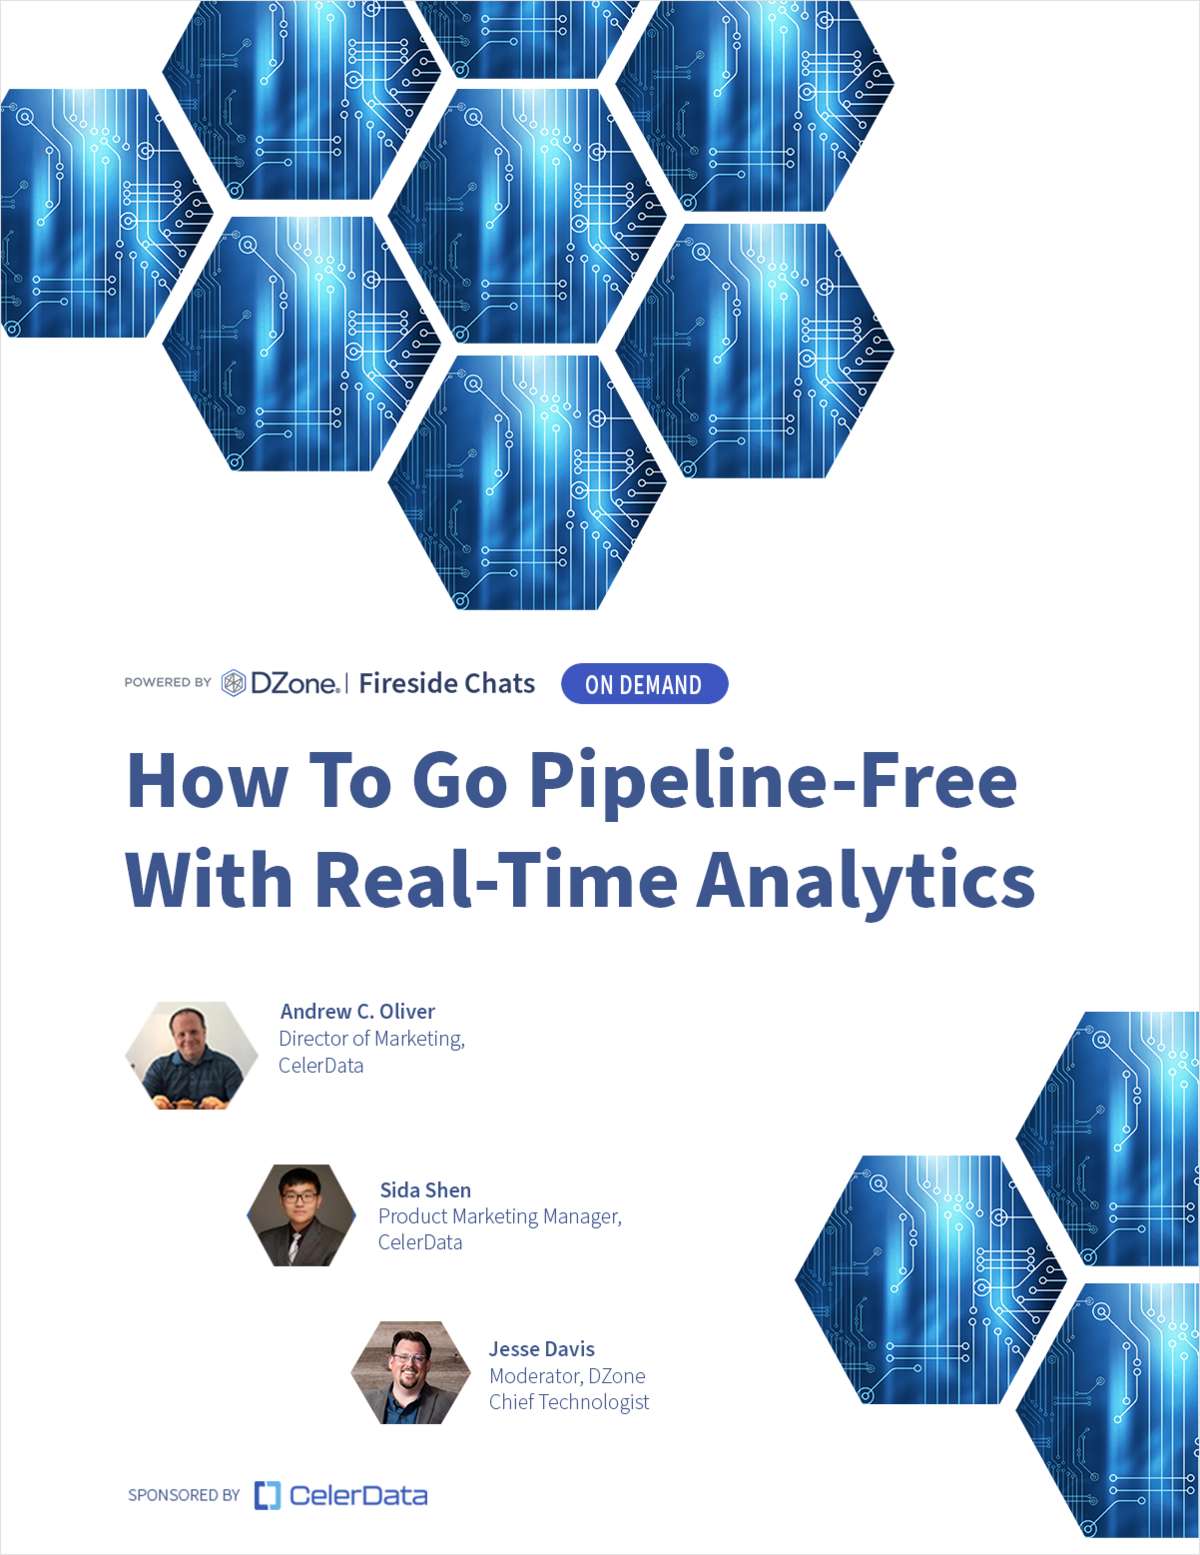 How To Go Pipeline-Free With Real-Time Analytics